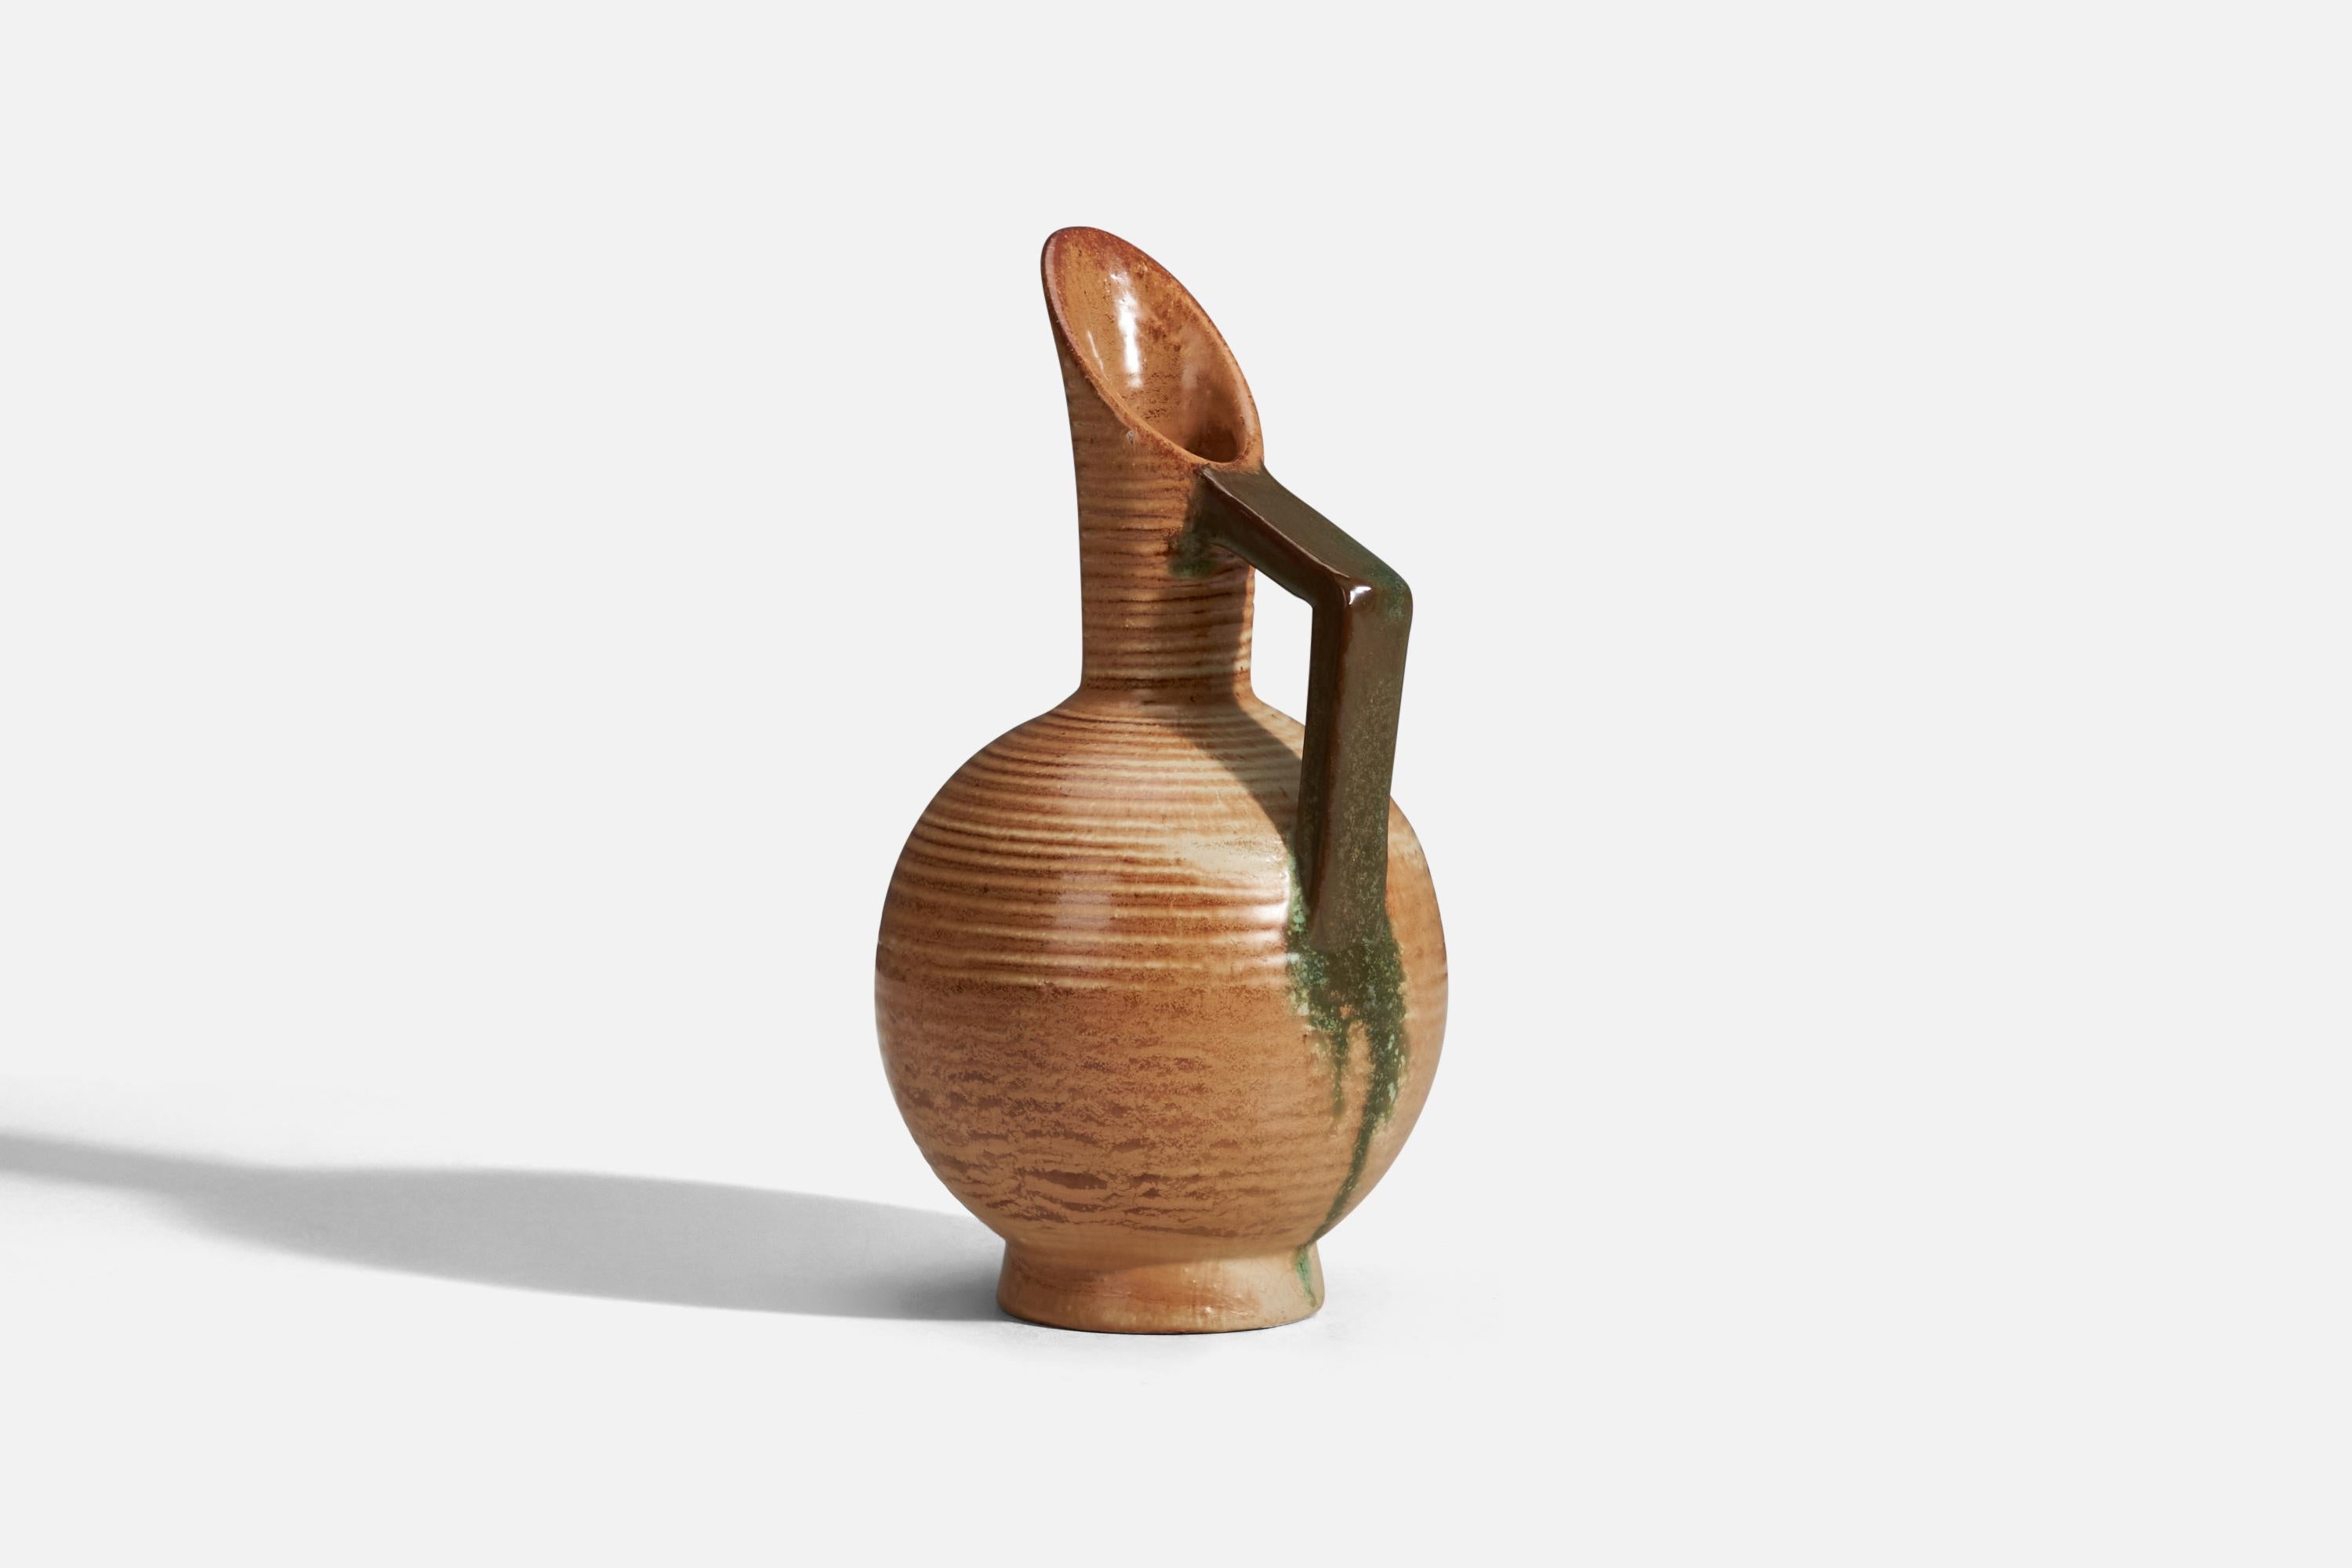 A brown and green glazed stoneware pitcher designed and produced by Höganas Keramik, Höganäs, Sweden, 1930s.